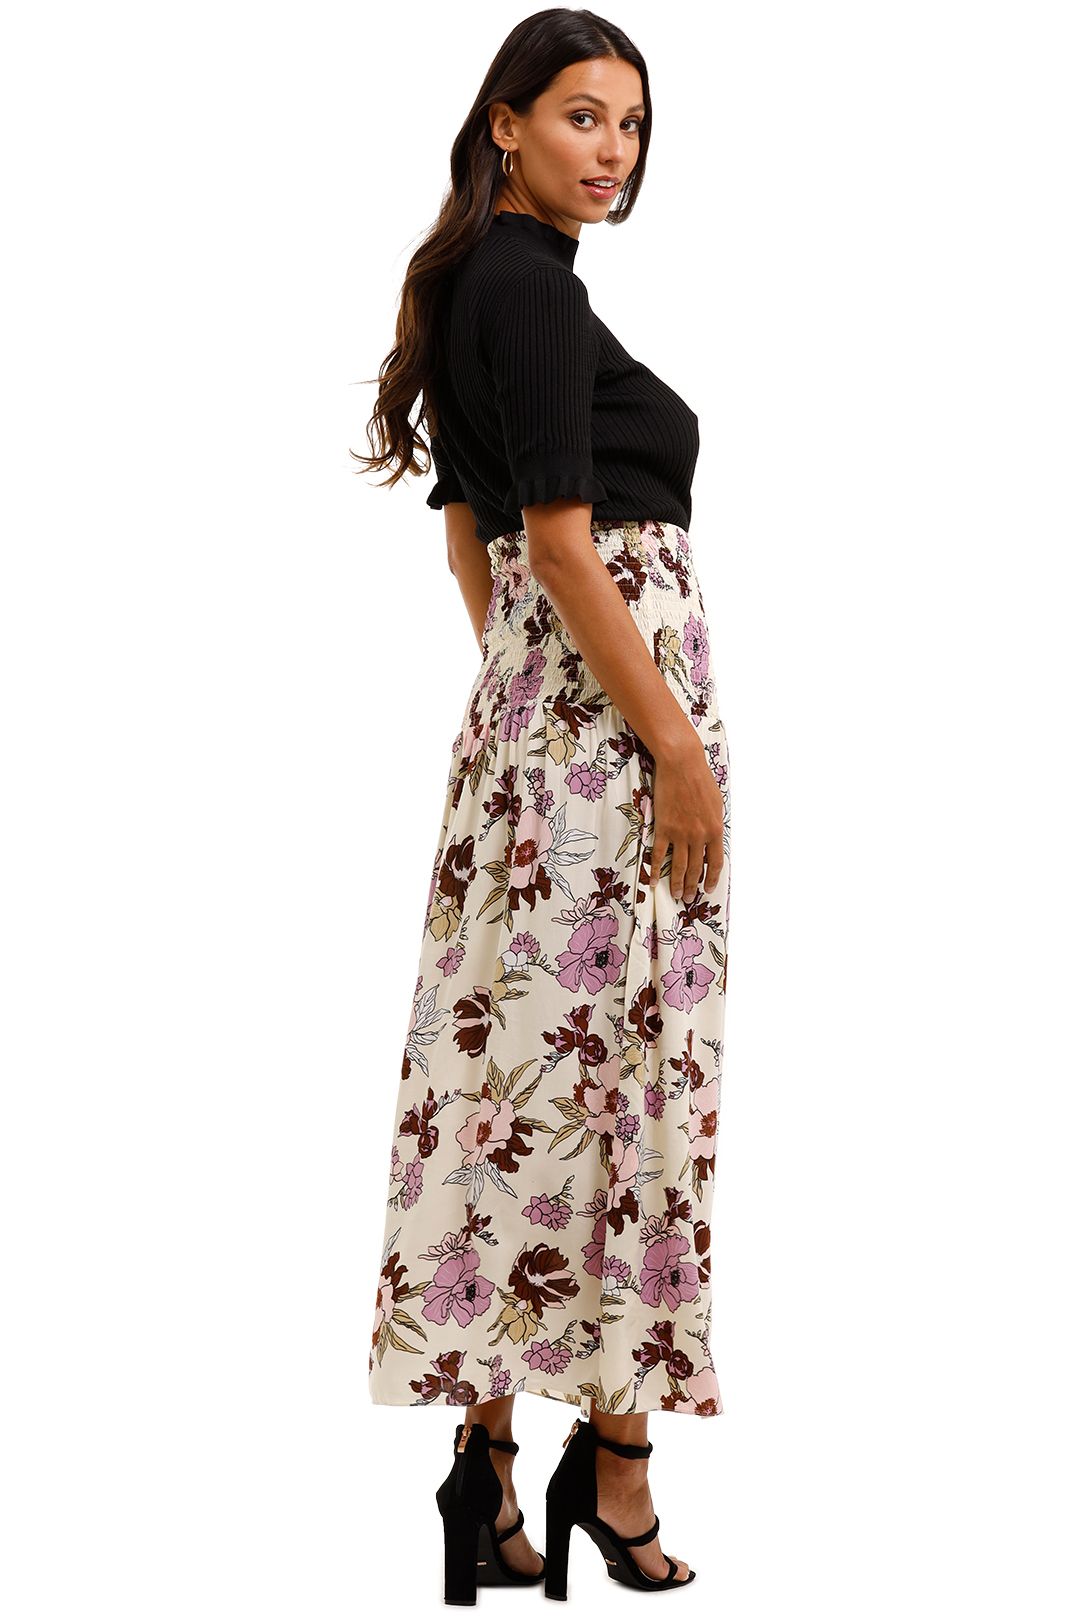 MLM Label Tome Skirt Aster Floral Light Maxi Length